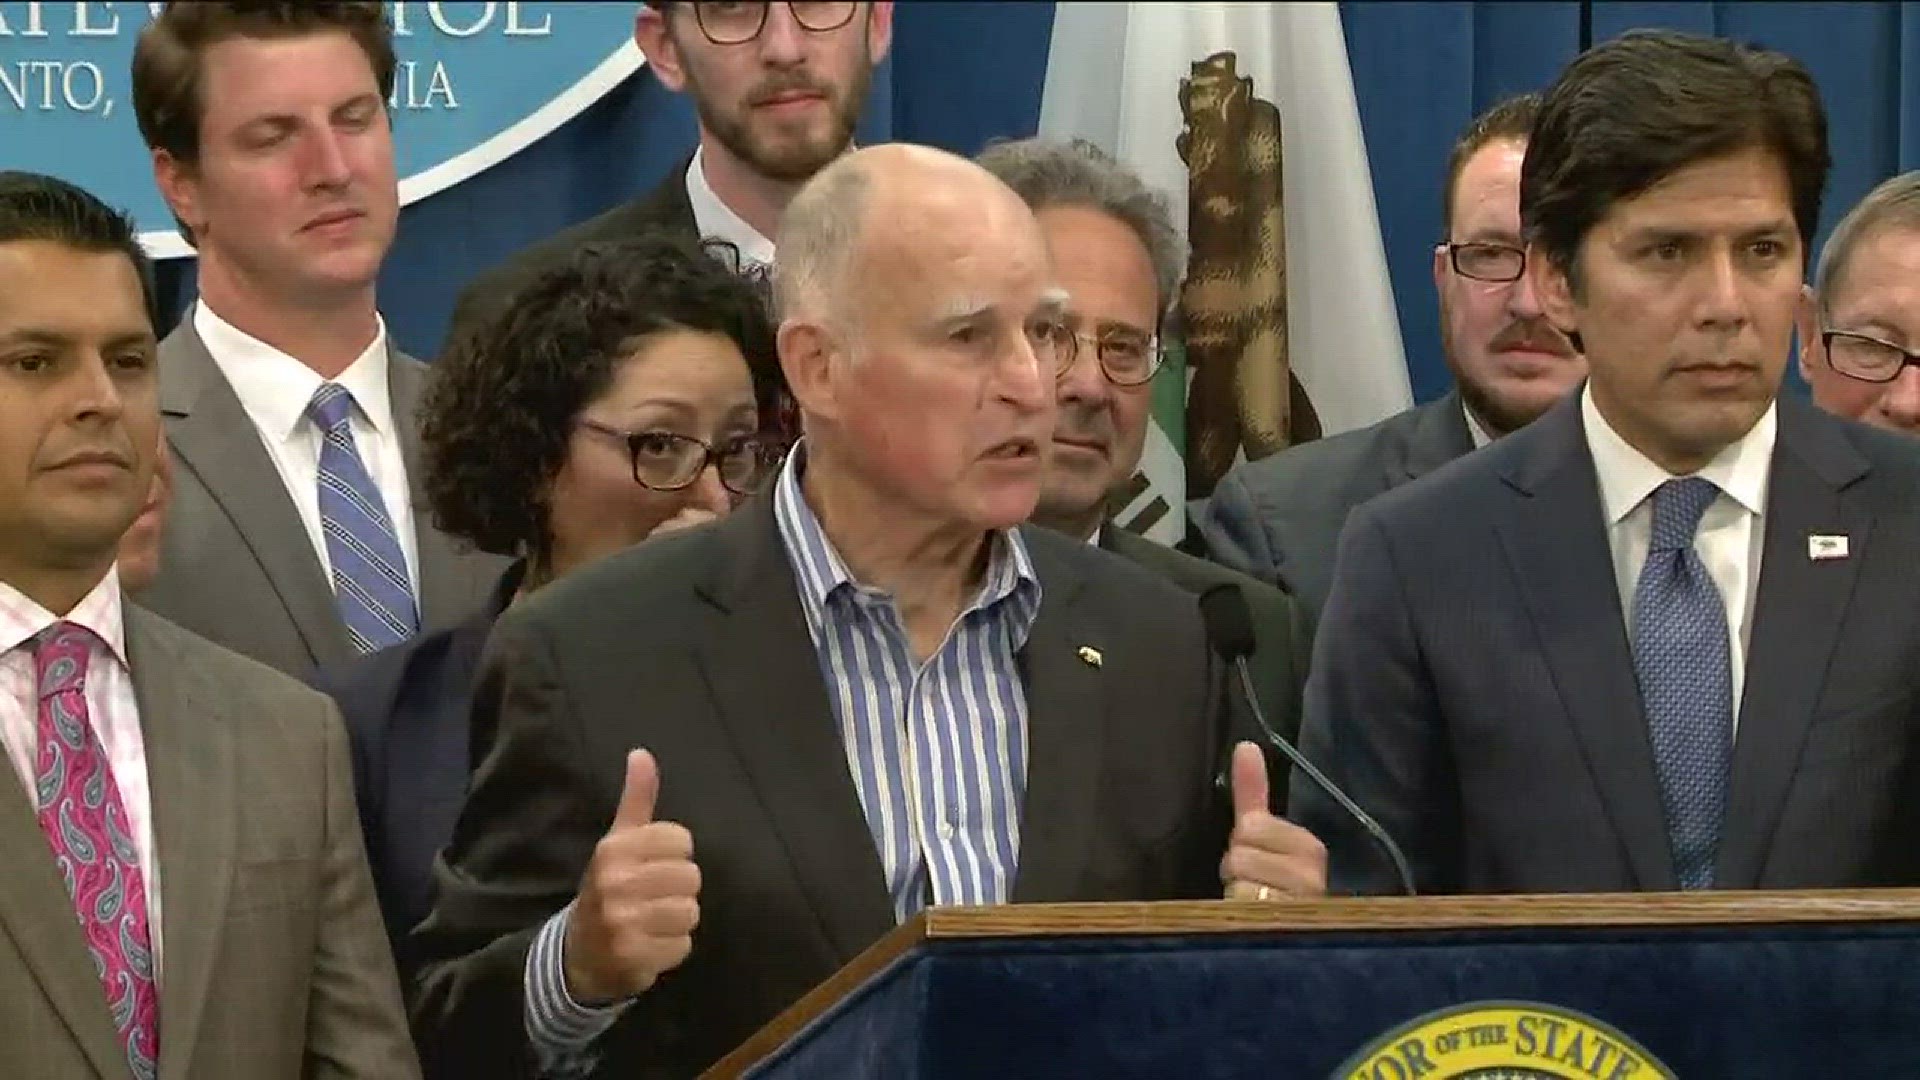 California lawmakers voted Monday to extend a climate change initiative that Gov. Jerry Brown holds up as a model for states and nations looking to lower carbon emissions.